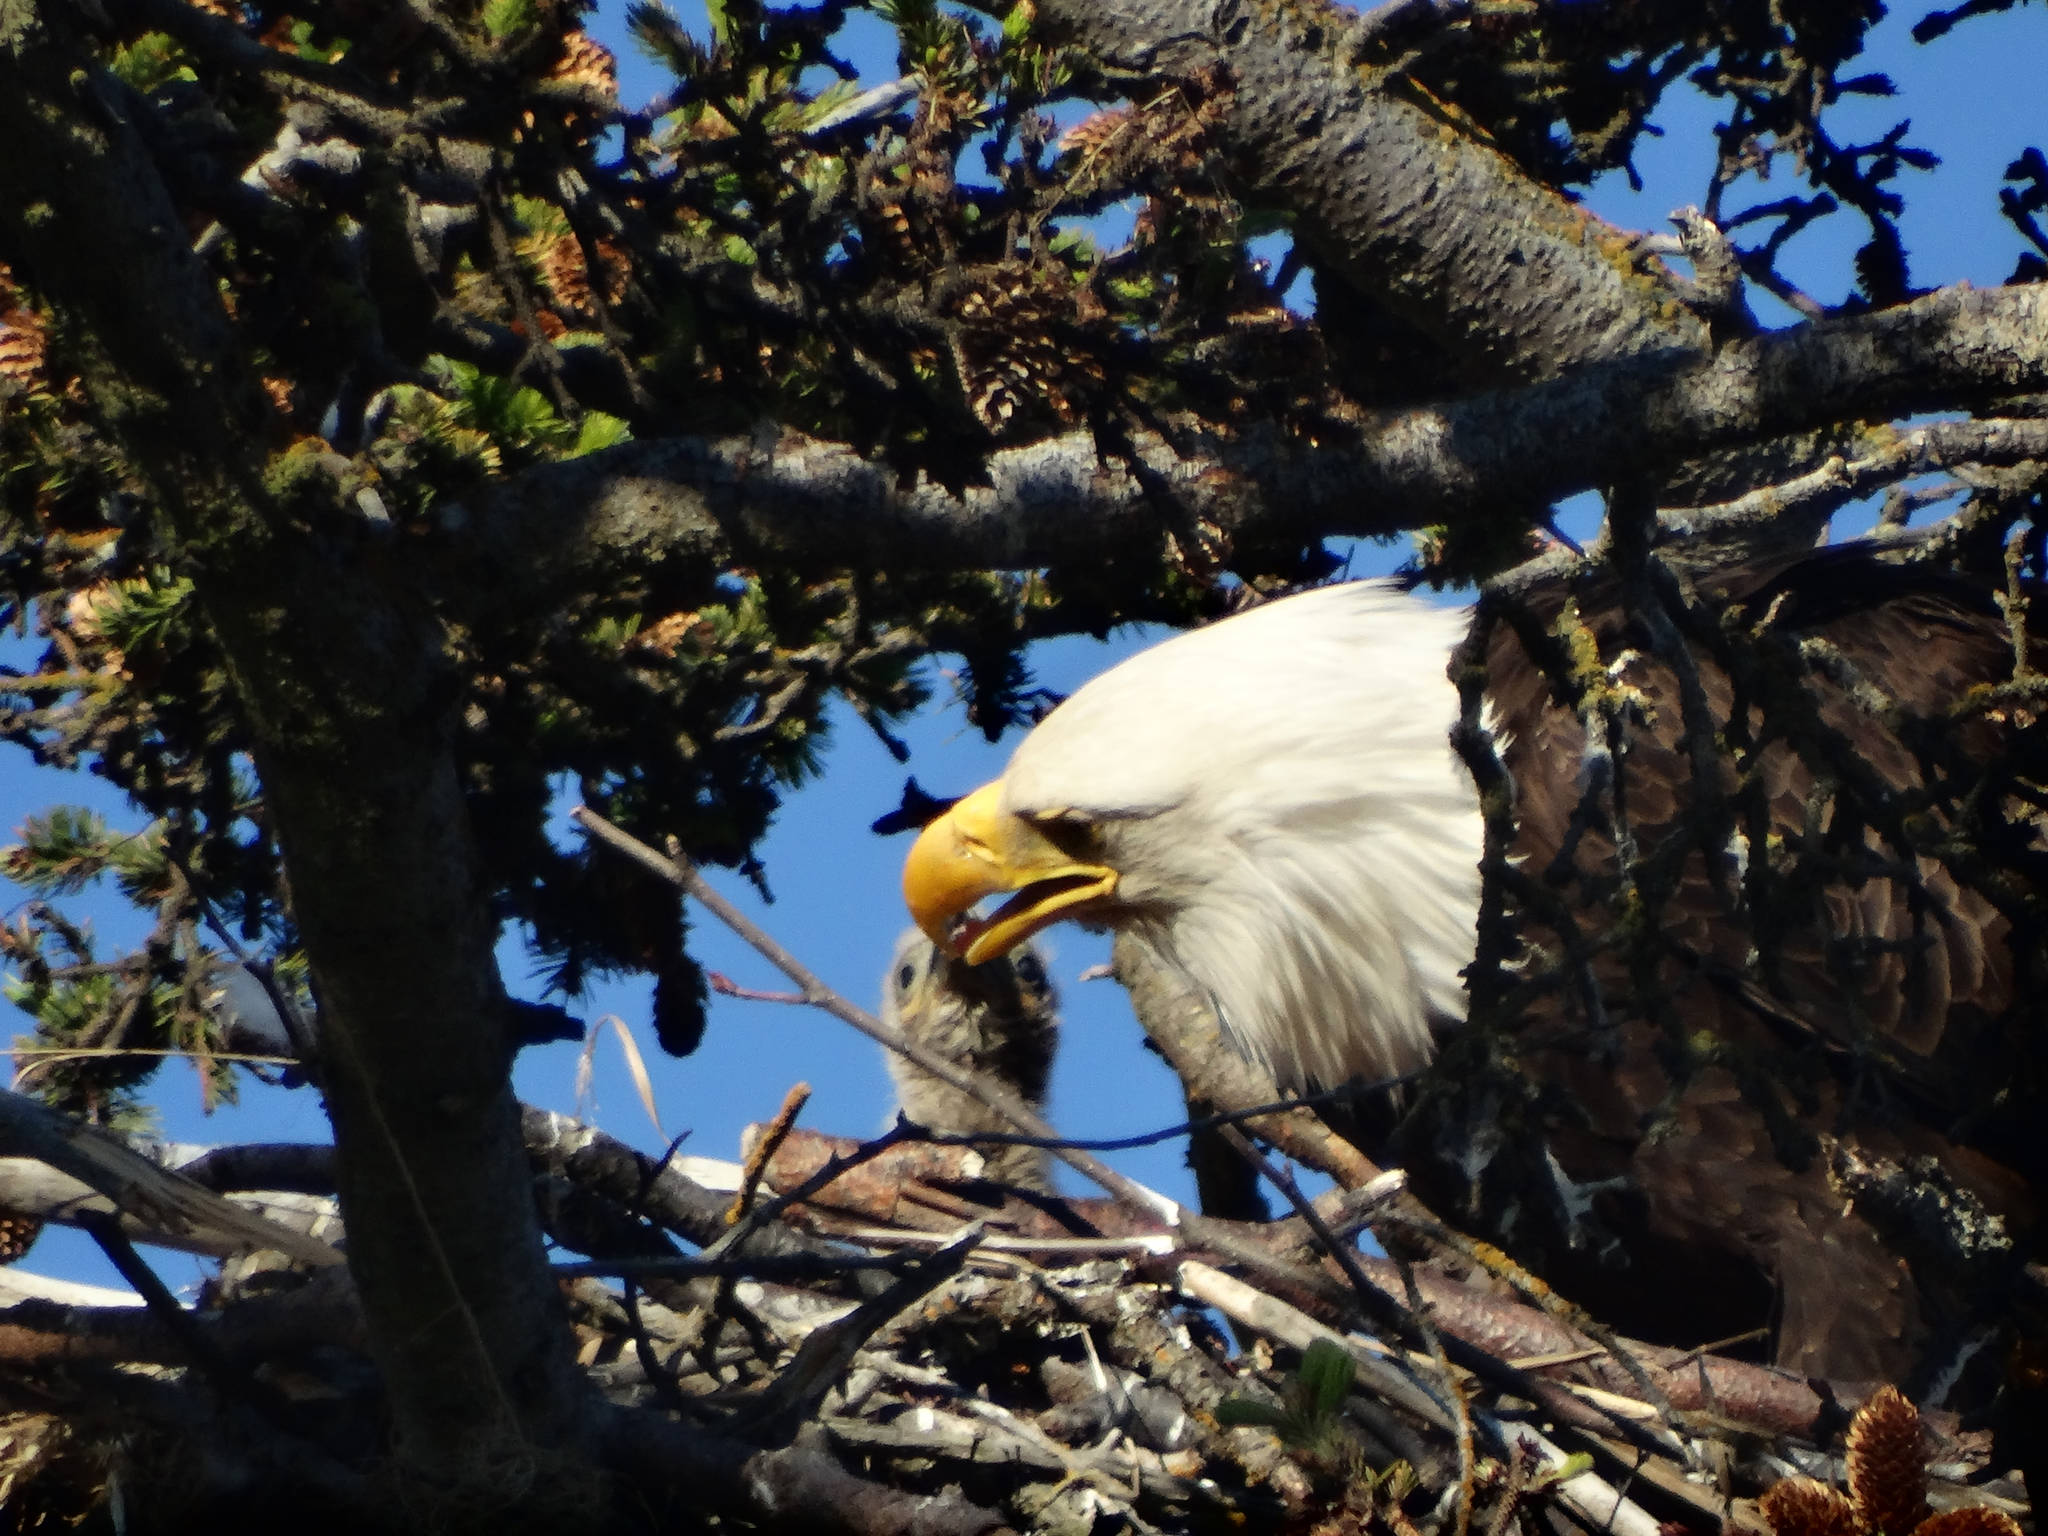 A bald eagle feeds a chick at the nest by the Homer RV Dump on June 24. Photo by Peter MacDonald for the Homer News